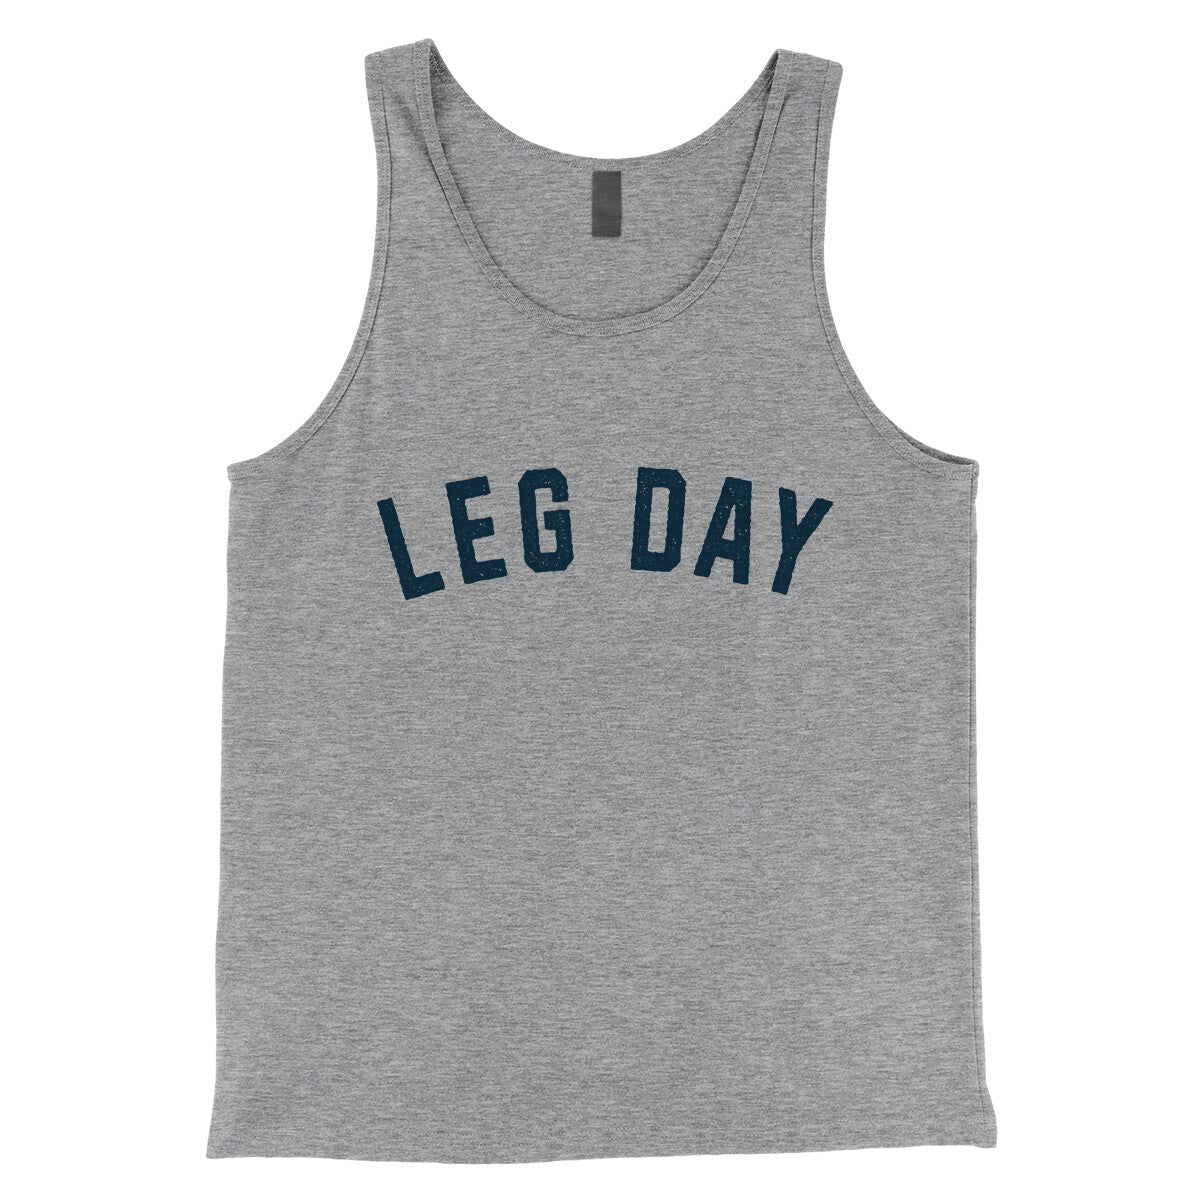 Leg Day in Athletic Heather Color